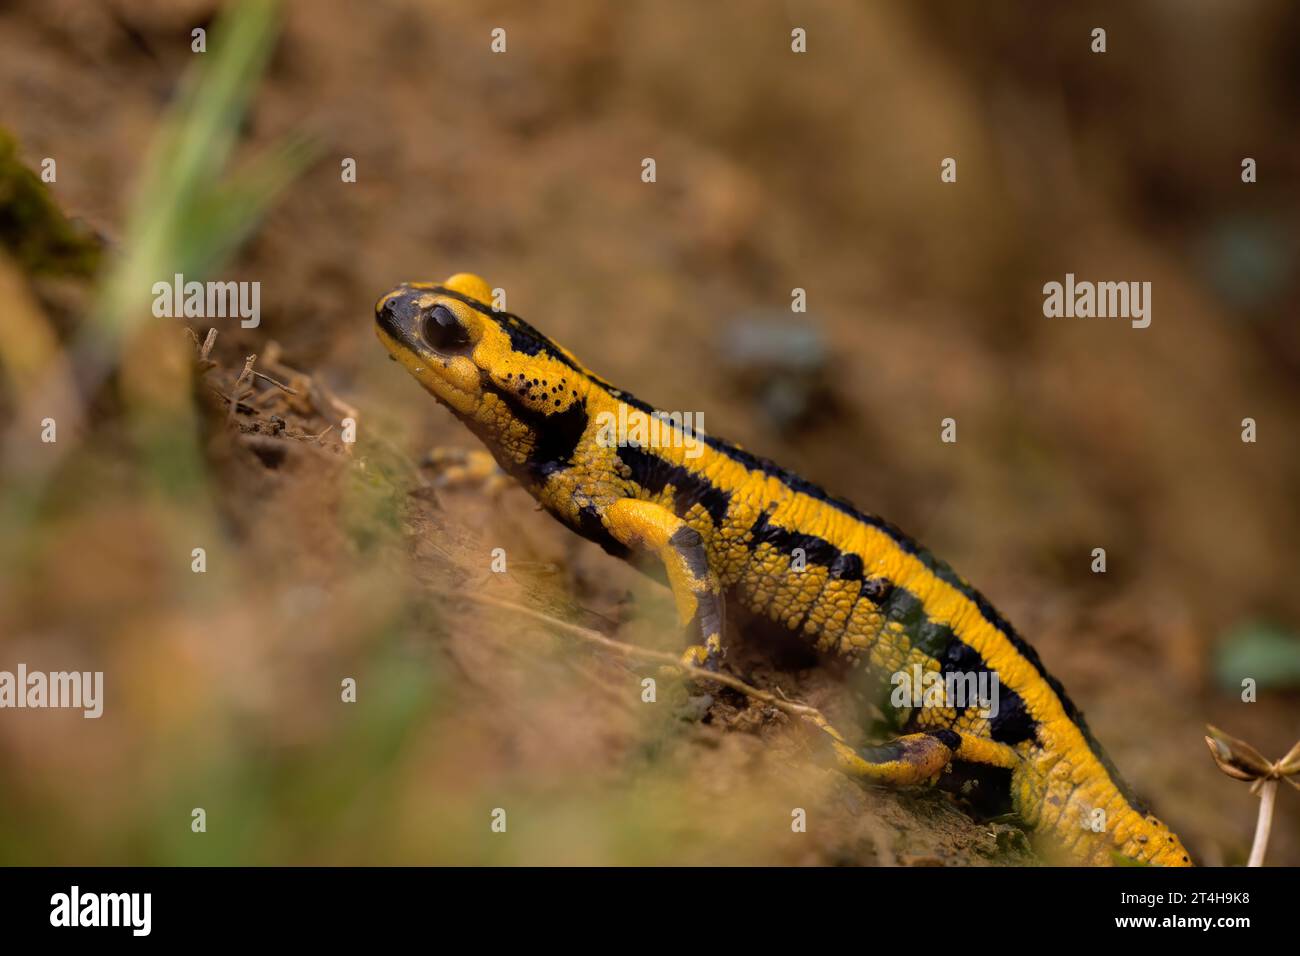 yellow and black salamander walking in the mud of the forest, free-living amphibians in nature, horizontal macro photography. copy space Stock Photo